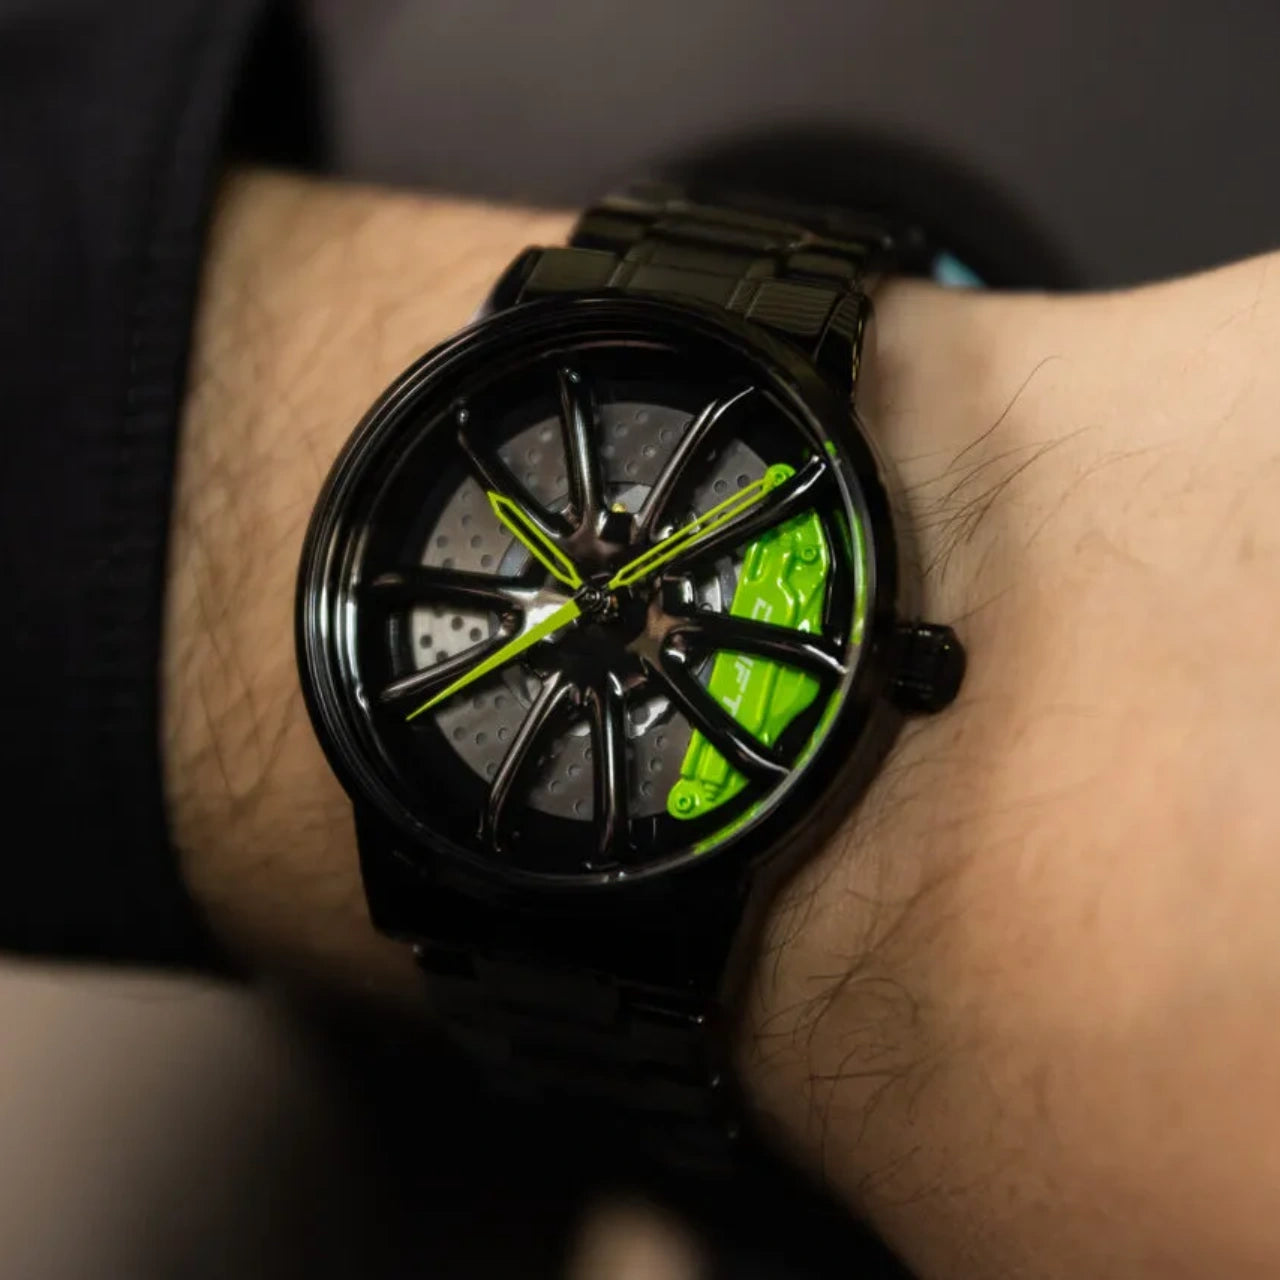 Illuminate your automotive passion with our striking green Performance GT Rim Watch! Meticulously crafted by a German startup, these precision watches are designed to captivate motorsport, tuning, and auto aficionados. Get ready to ignite your passion in style! #id_46744365465930